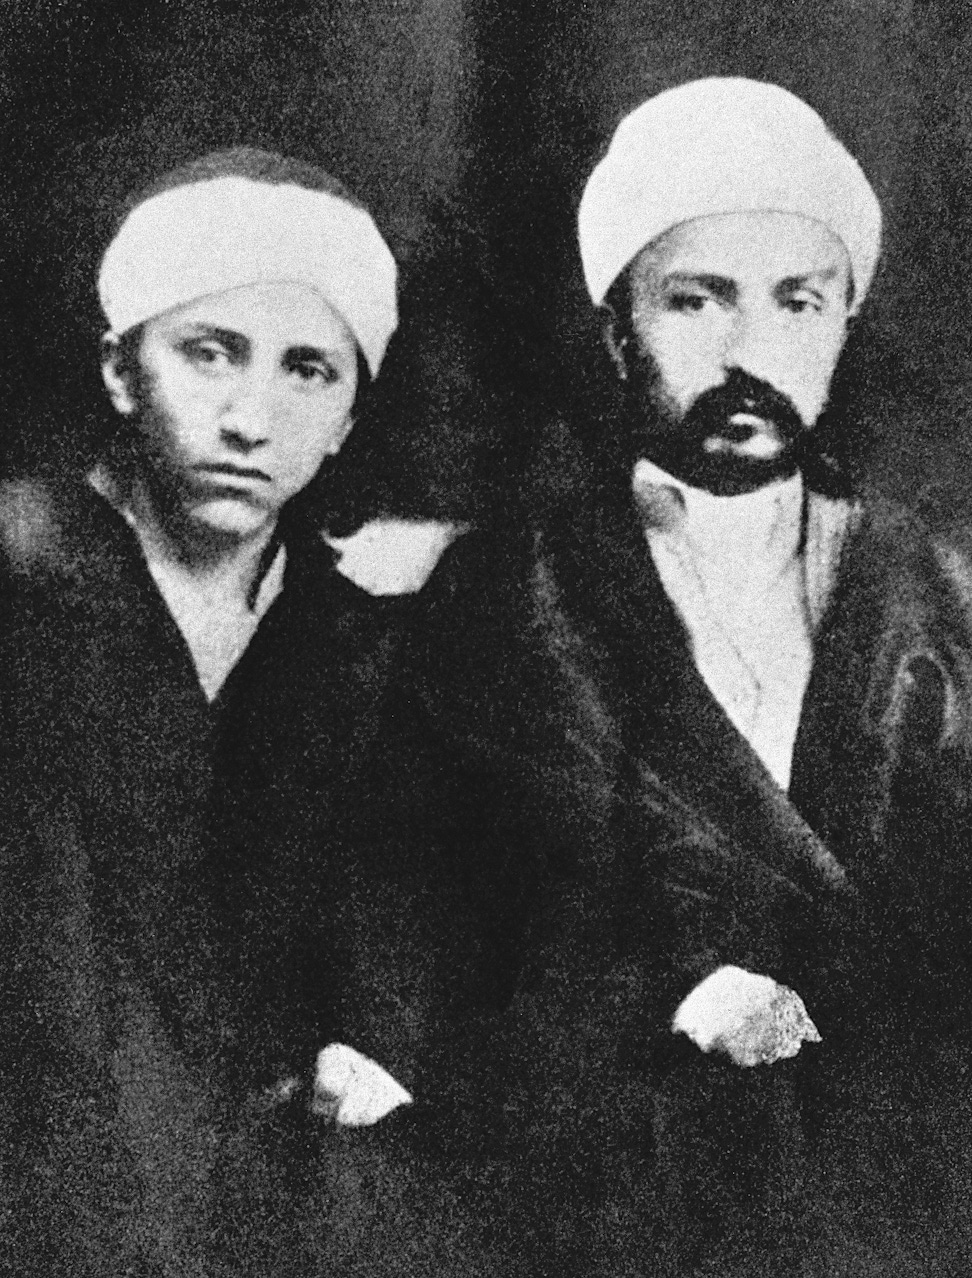 ‘Abdu’l-Bahá (right) with His brother Mírzá Mihdí, The Purest Branch (left), taken in Edirne, c. 1864-1868